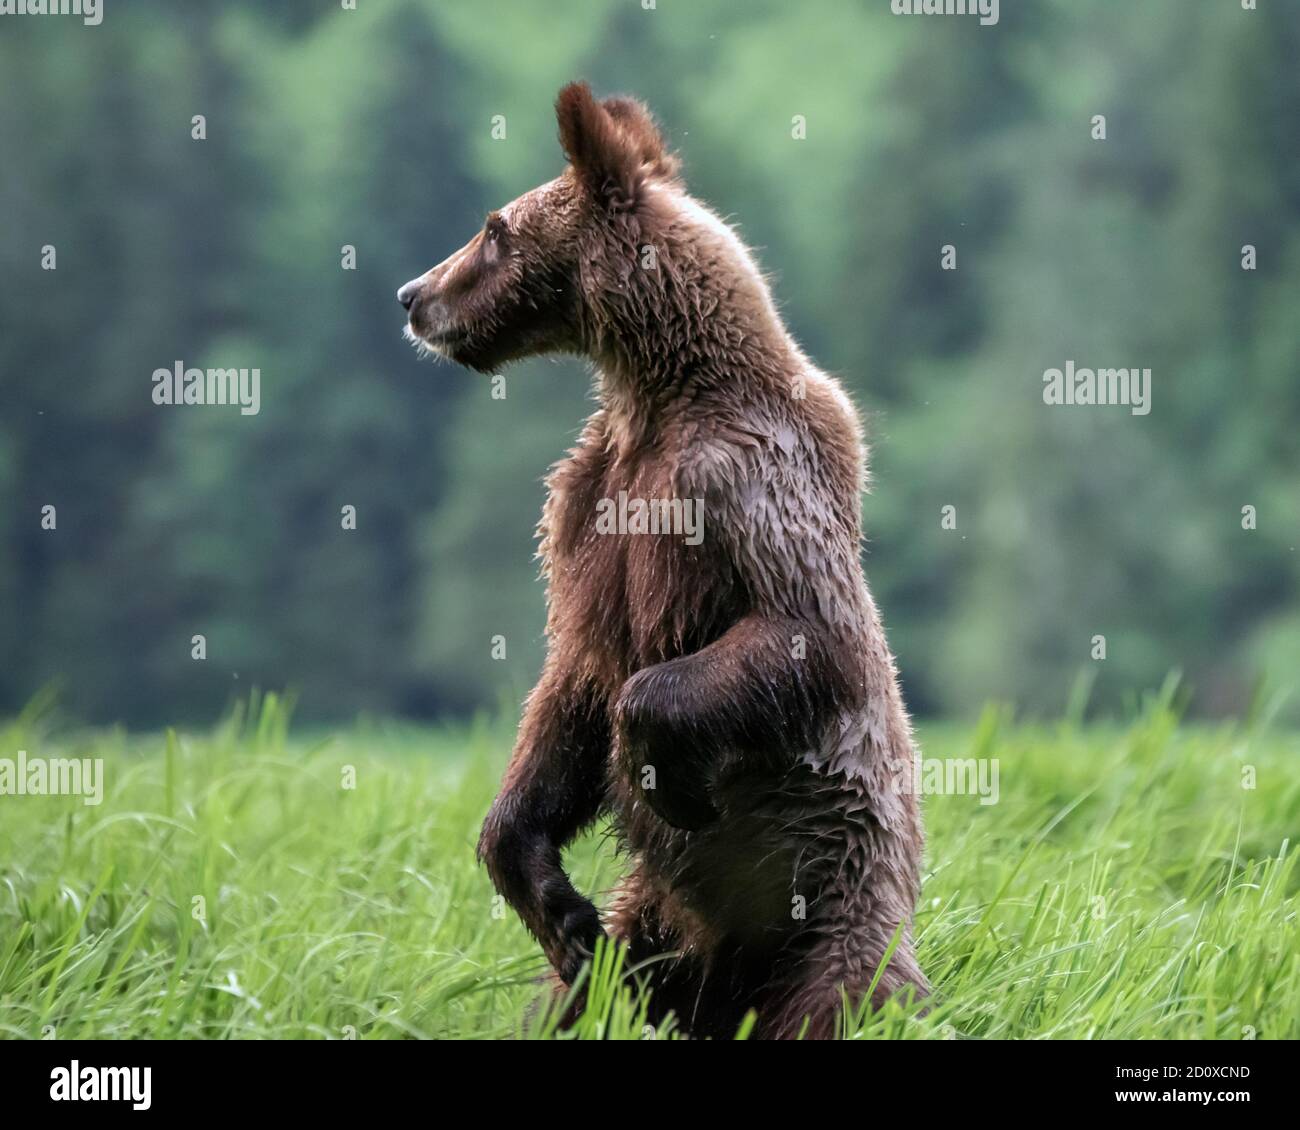 Grizzly cub standing on its hind legs in a sedge grass meadow to look for danger, Khutzeymateen, BC Stock Photo